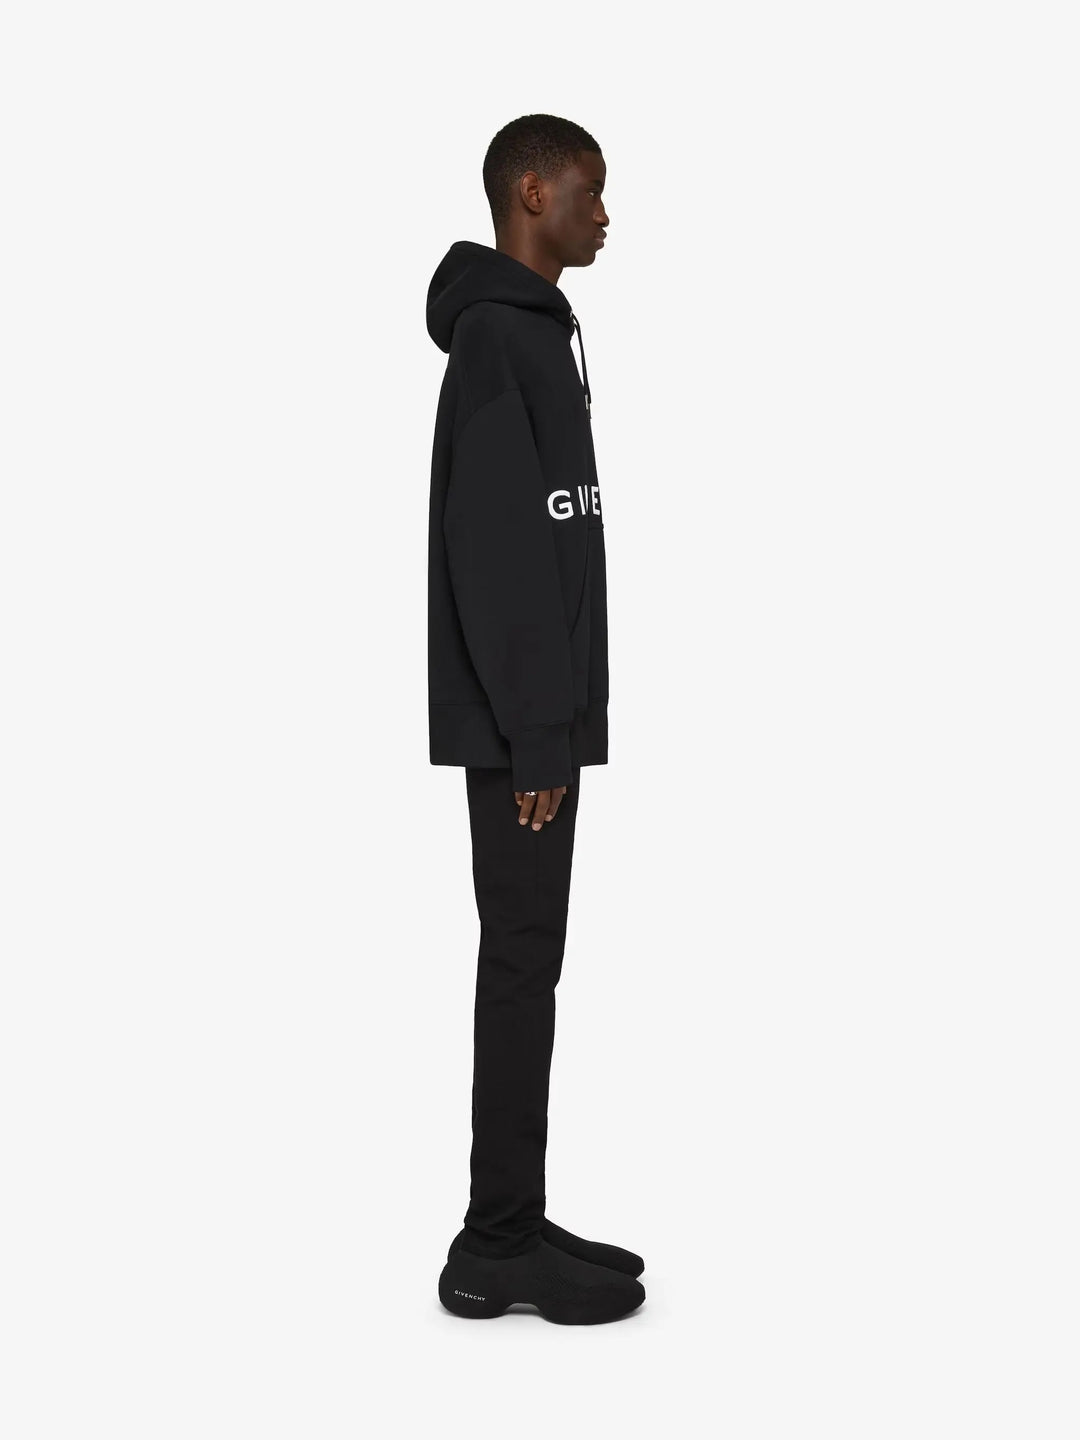 Givenchy Embroidered Classic Fit Hoodie | Hype Vault Kuala Lumpur